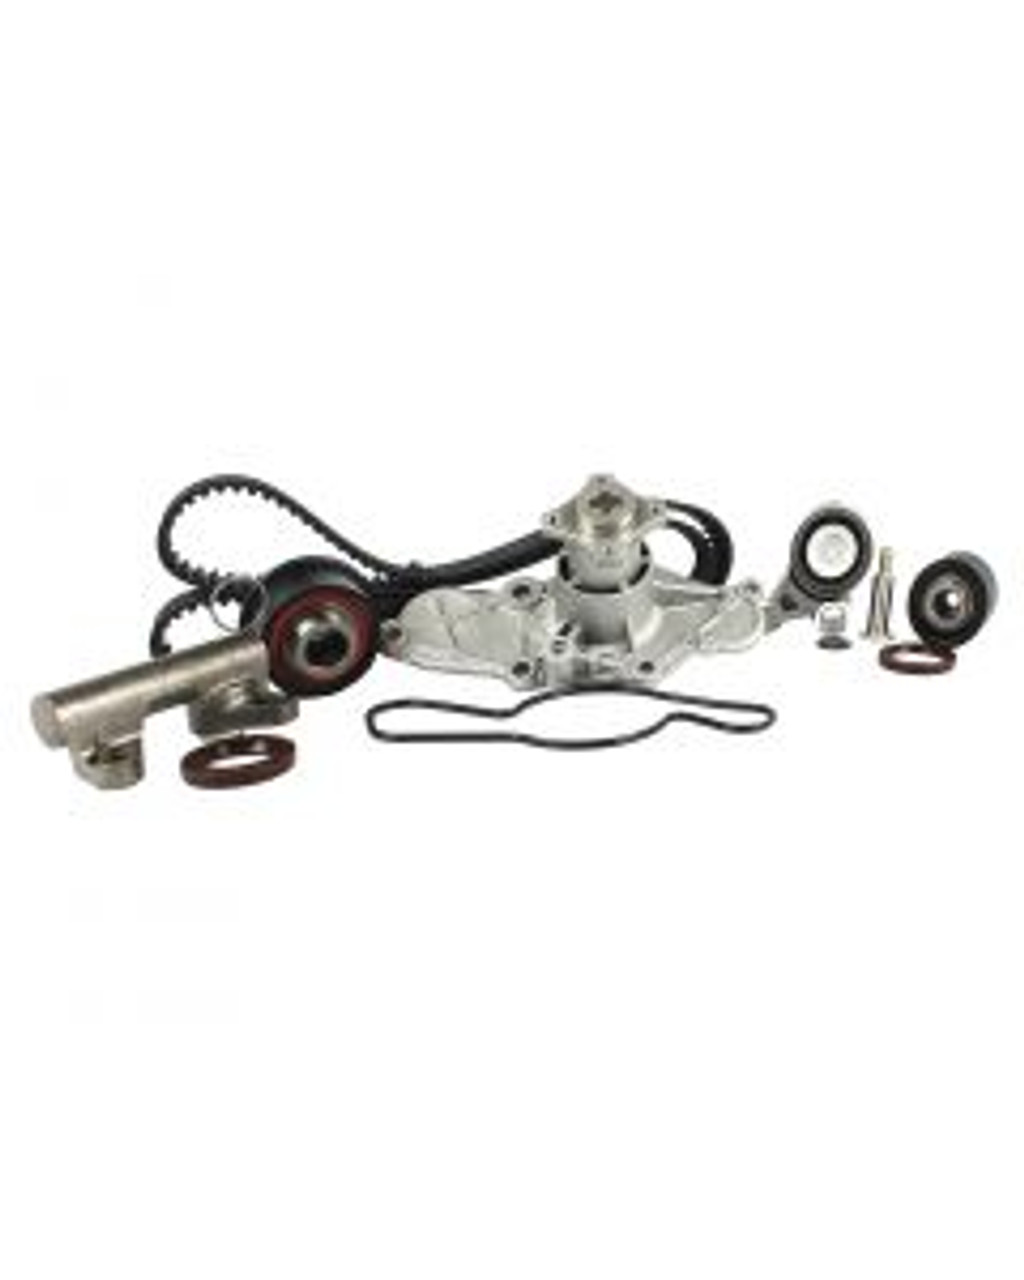 Timing Belt Kit with Water Pump 2.5L 2002 Mazda 626 - TBK455WP.13